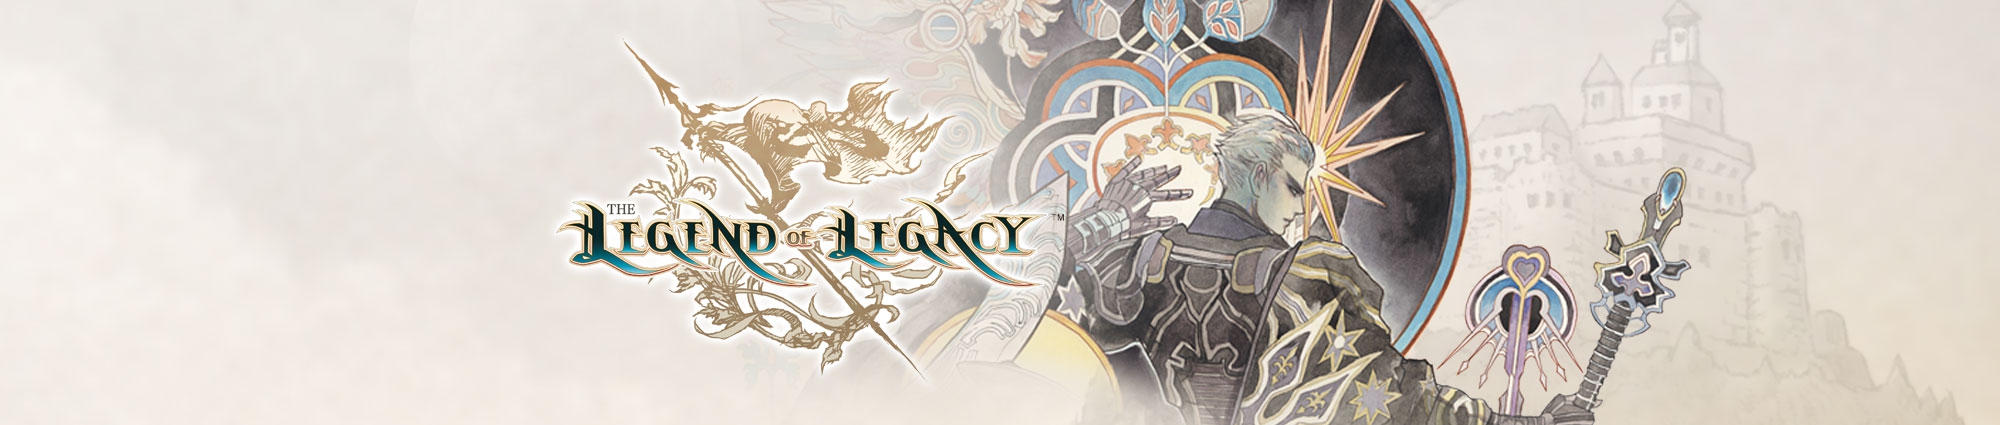 Banner The Legend of Legacy